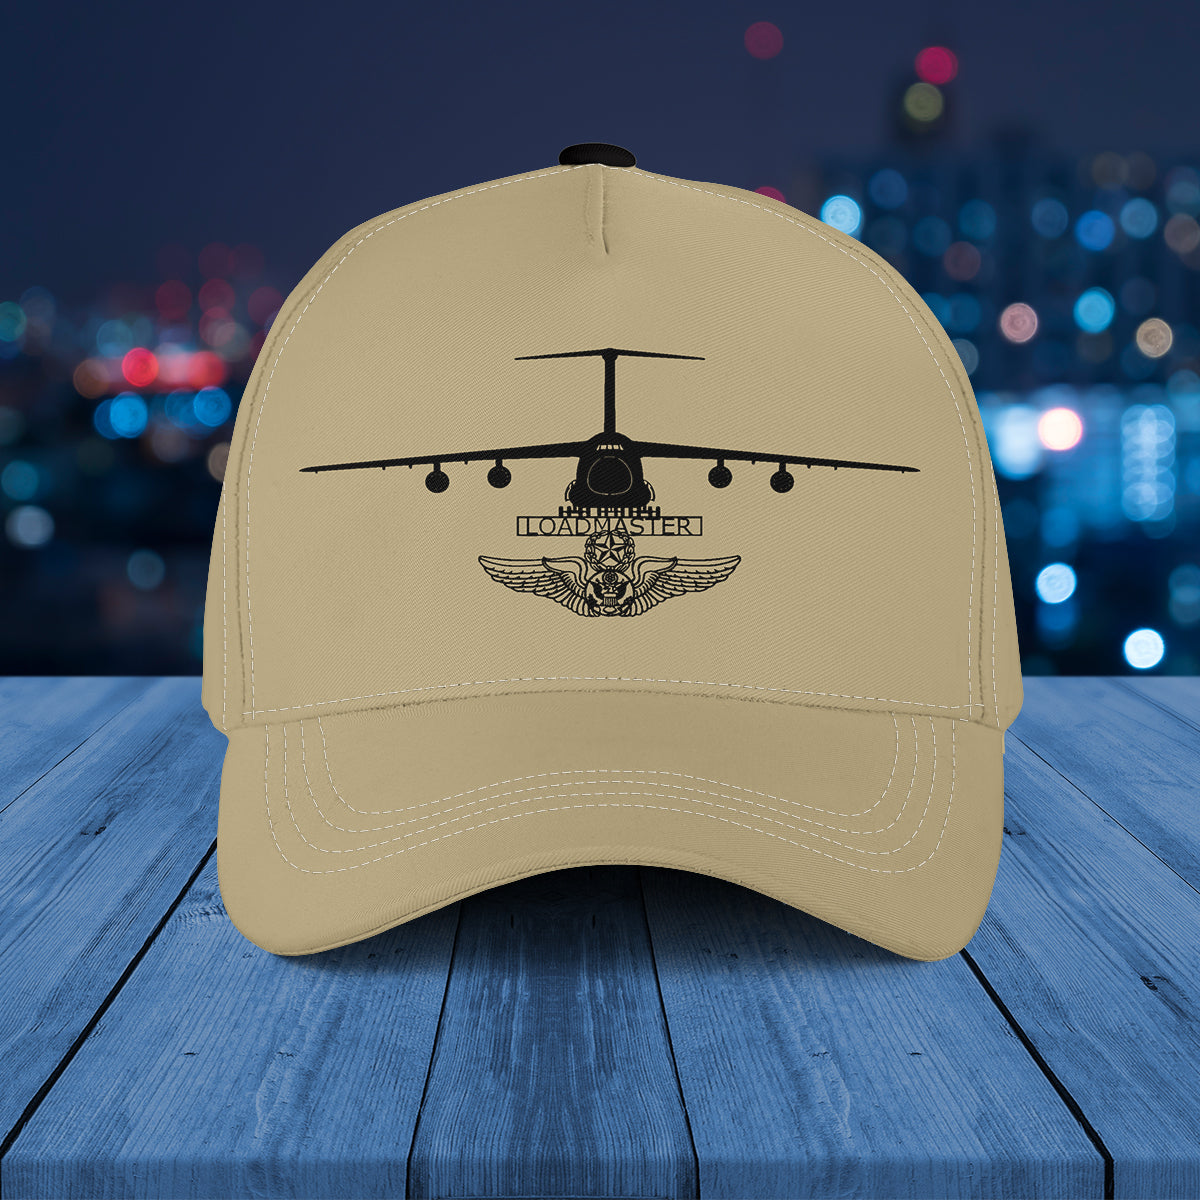 C-5 Galaxy - Loadmaster with Chief Enlisted Aircrew Wings Baseball Cap